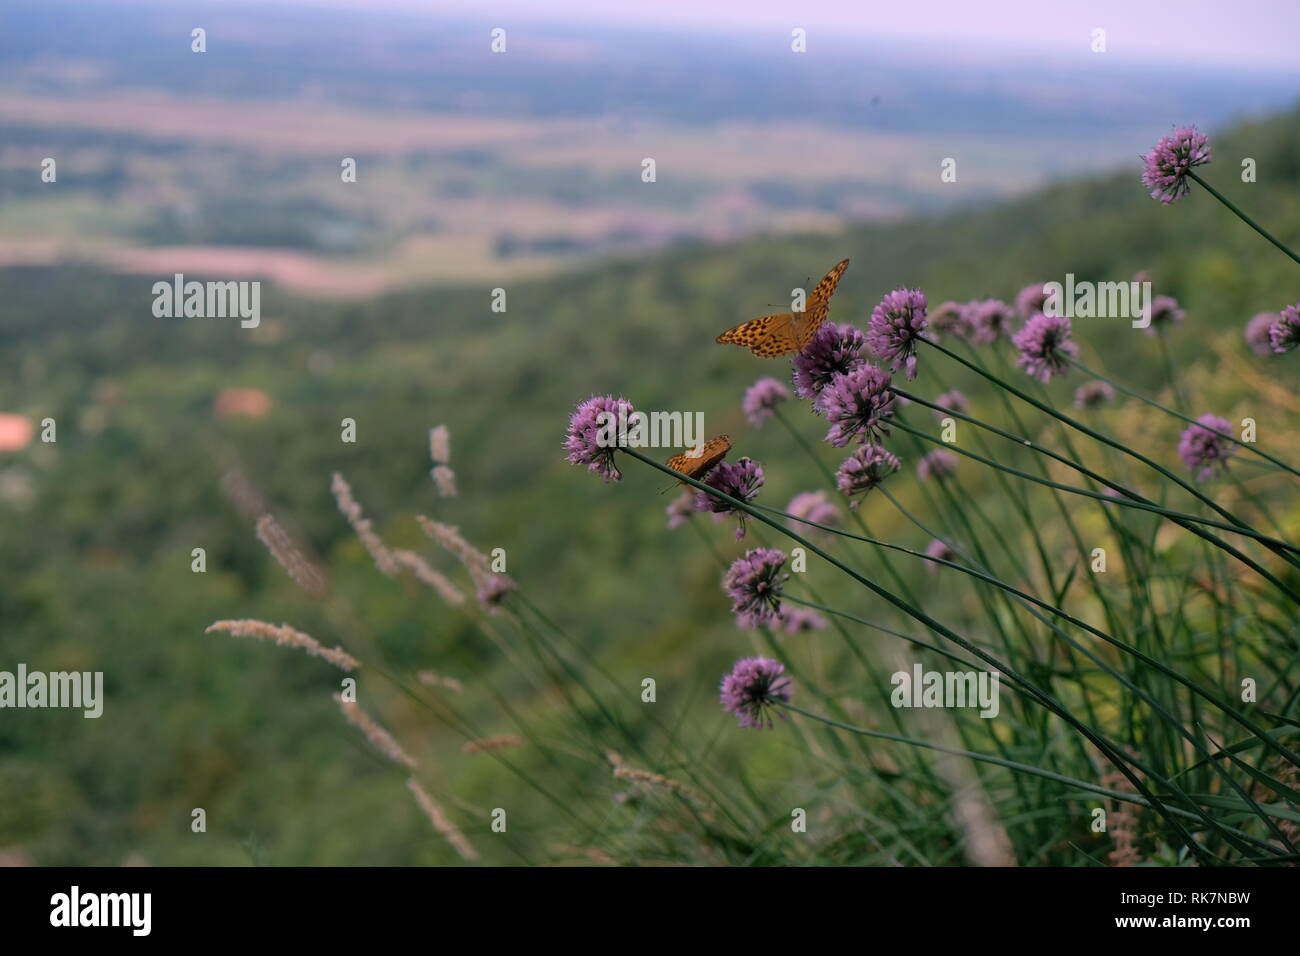 Butterfly on the purple flower on the top of a hill with a blurry view Stock Photo